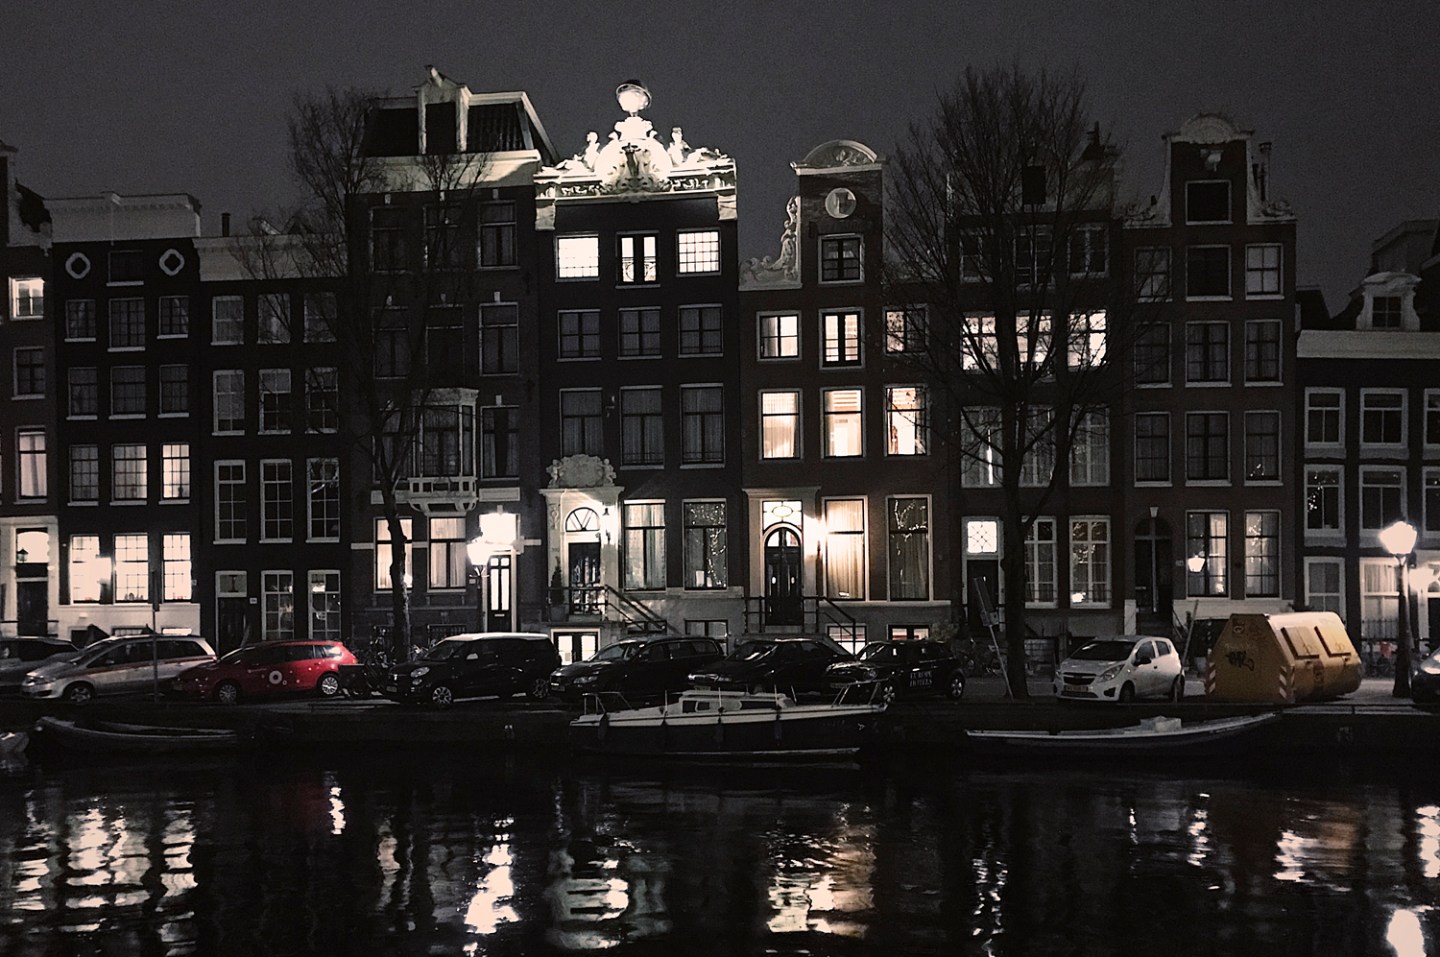 Nighttime on the Keizersgracht